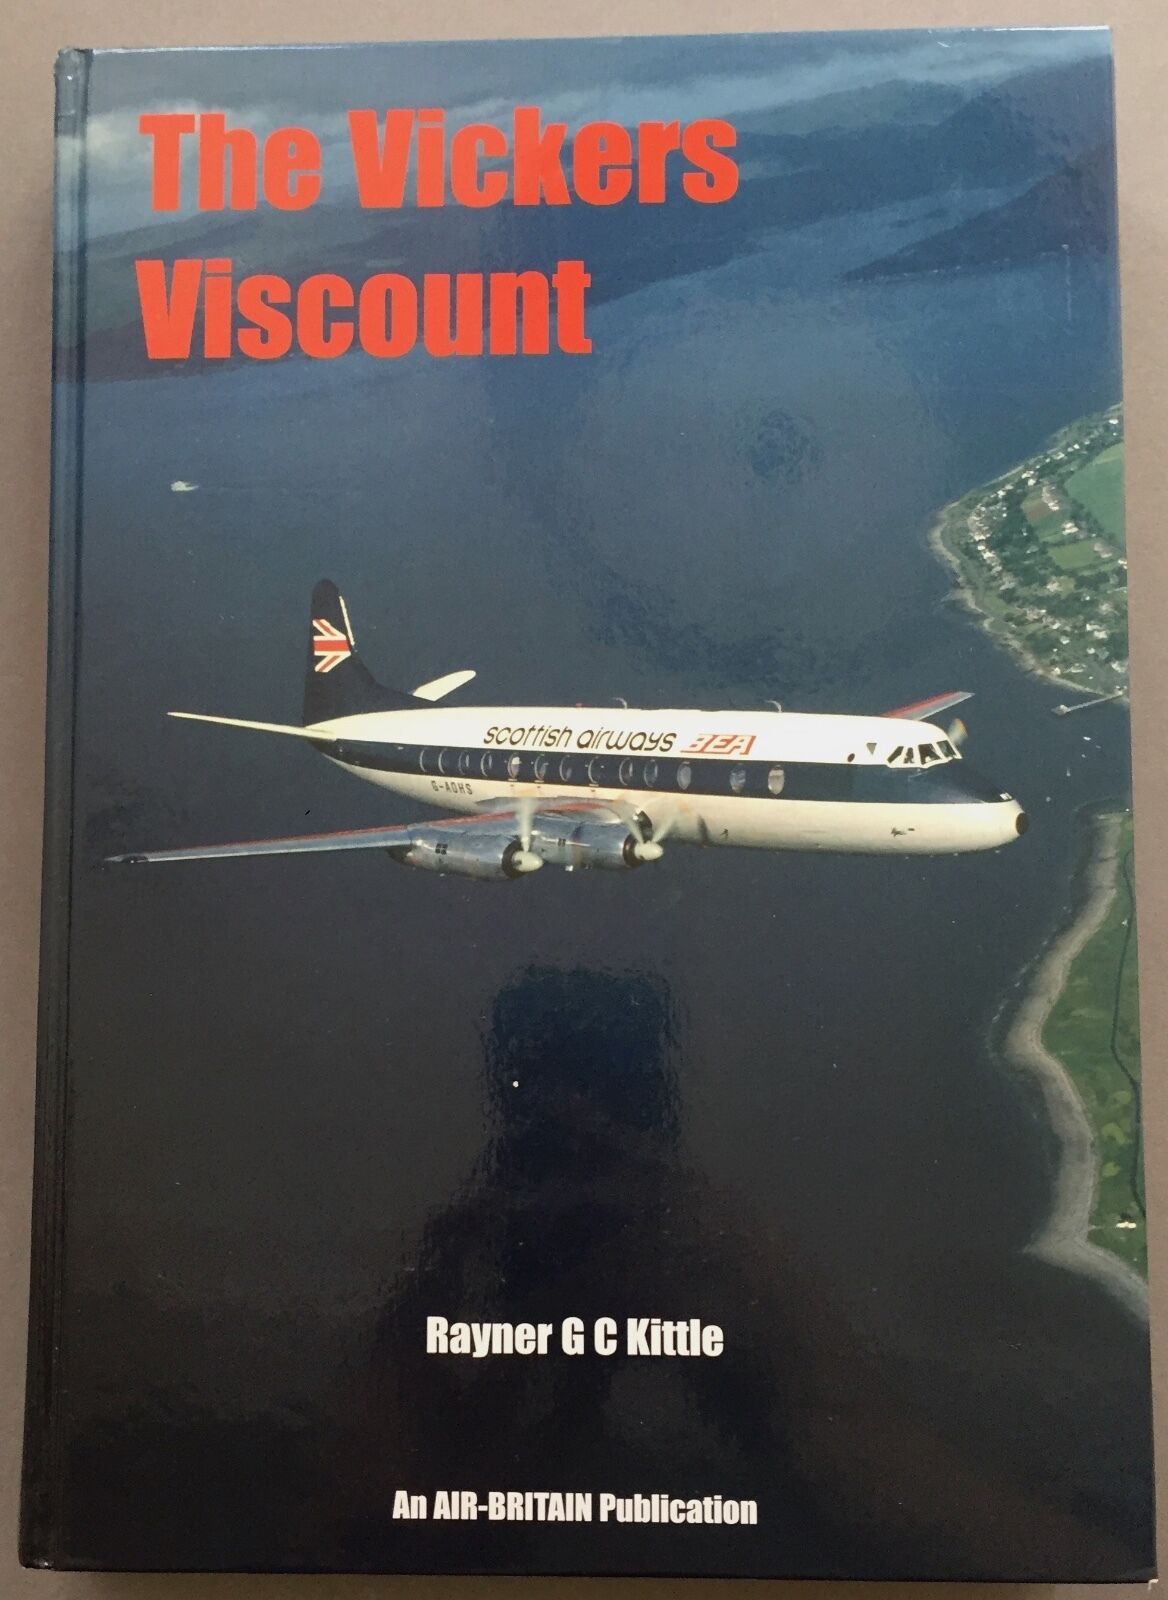 STUNNING VICKERS VISCOUNT BOOK & CD GREAT PICTURES 448 PAGES BEA THY CYPRUS AIR